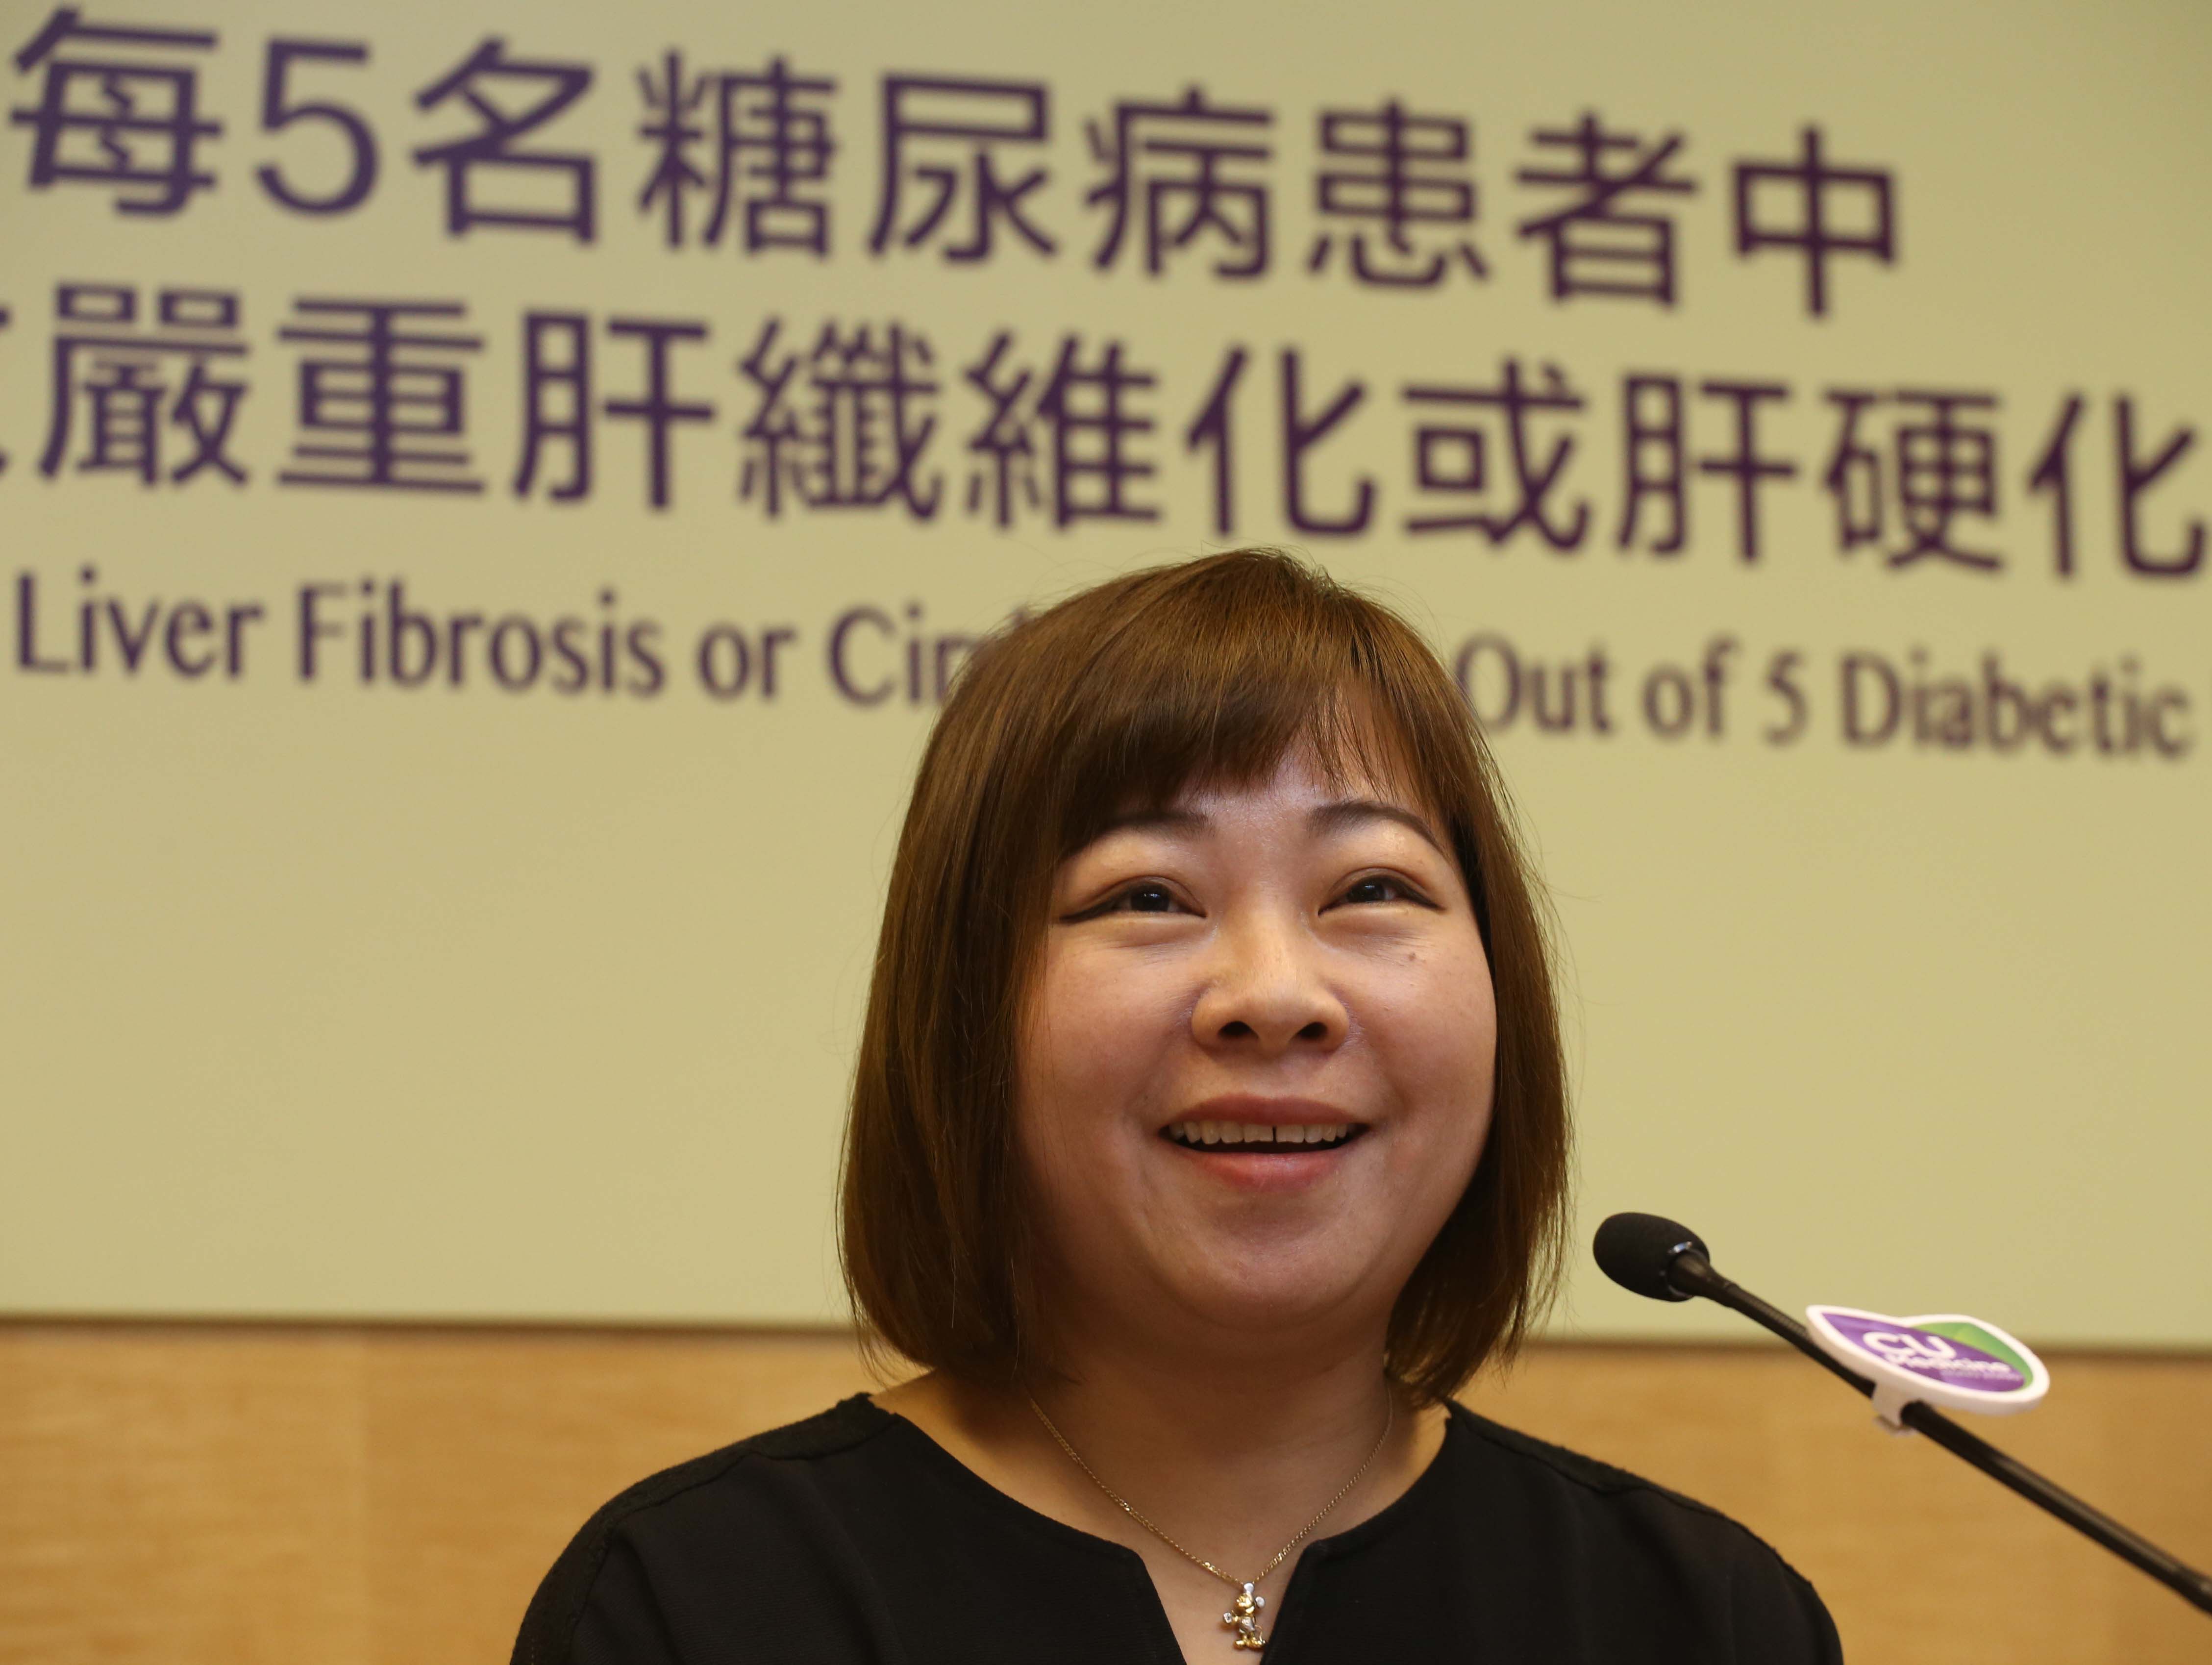 Diabetic patient Ms. Cheng has been monitoring diet and losing weight